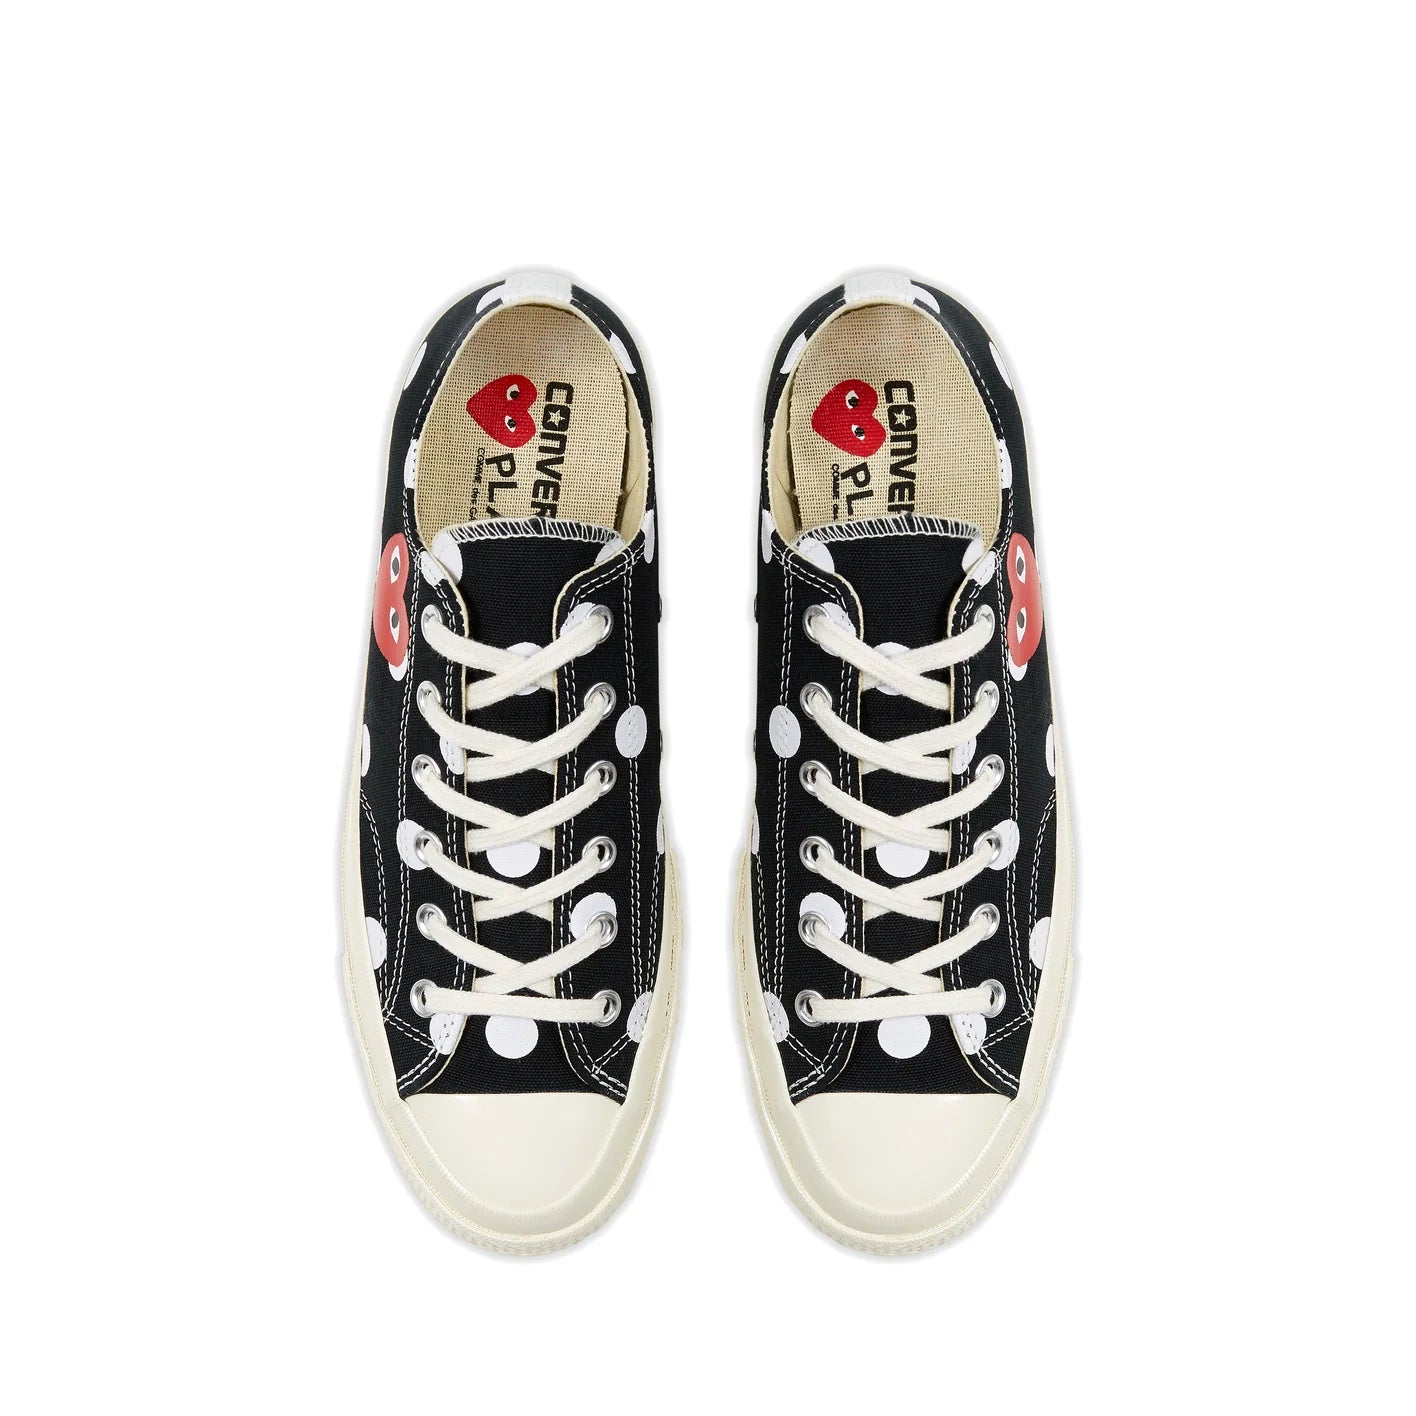 Play Converse - Polka Dot Red Heart Chuck Taylor All Star ’70 Low Sneakers - (Black) view 2